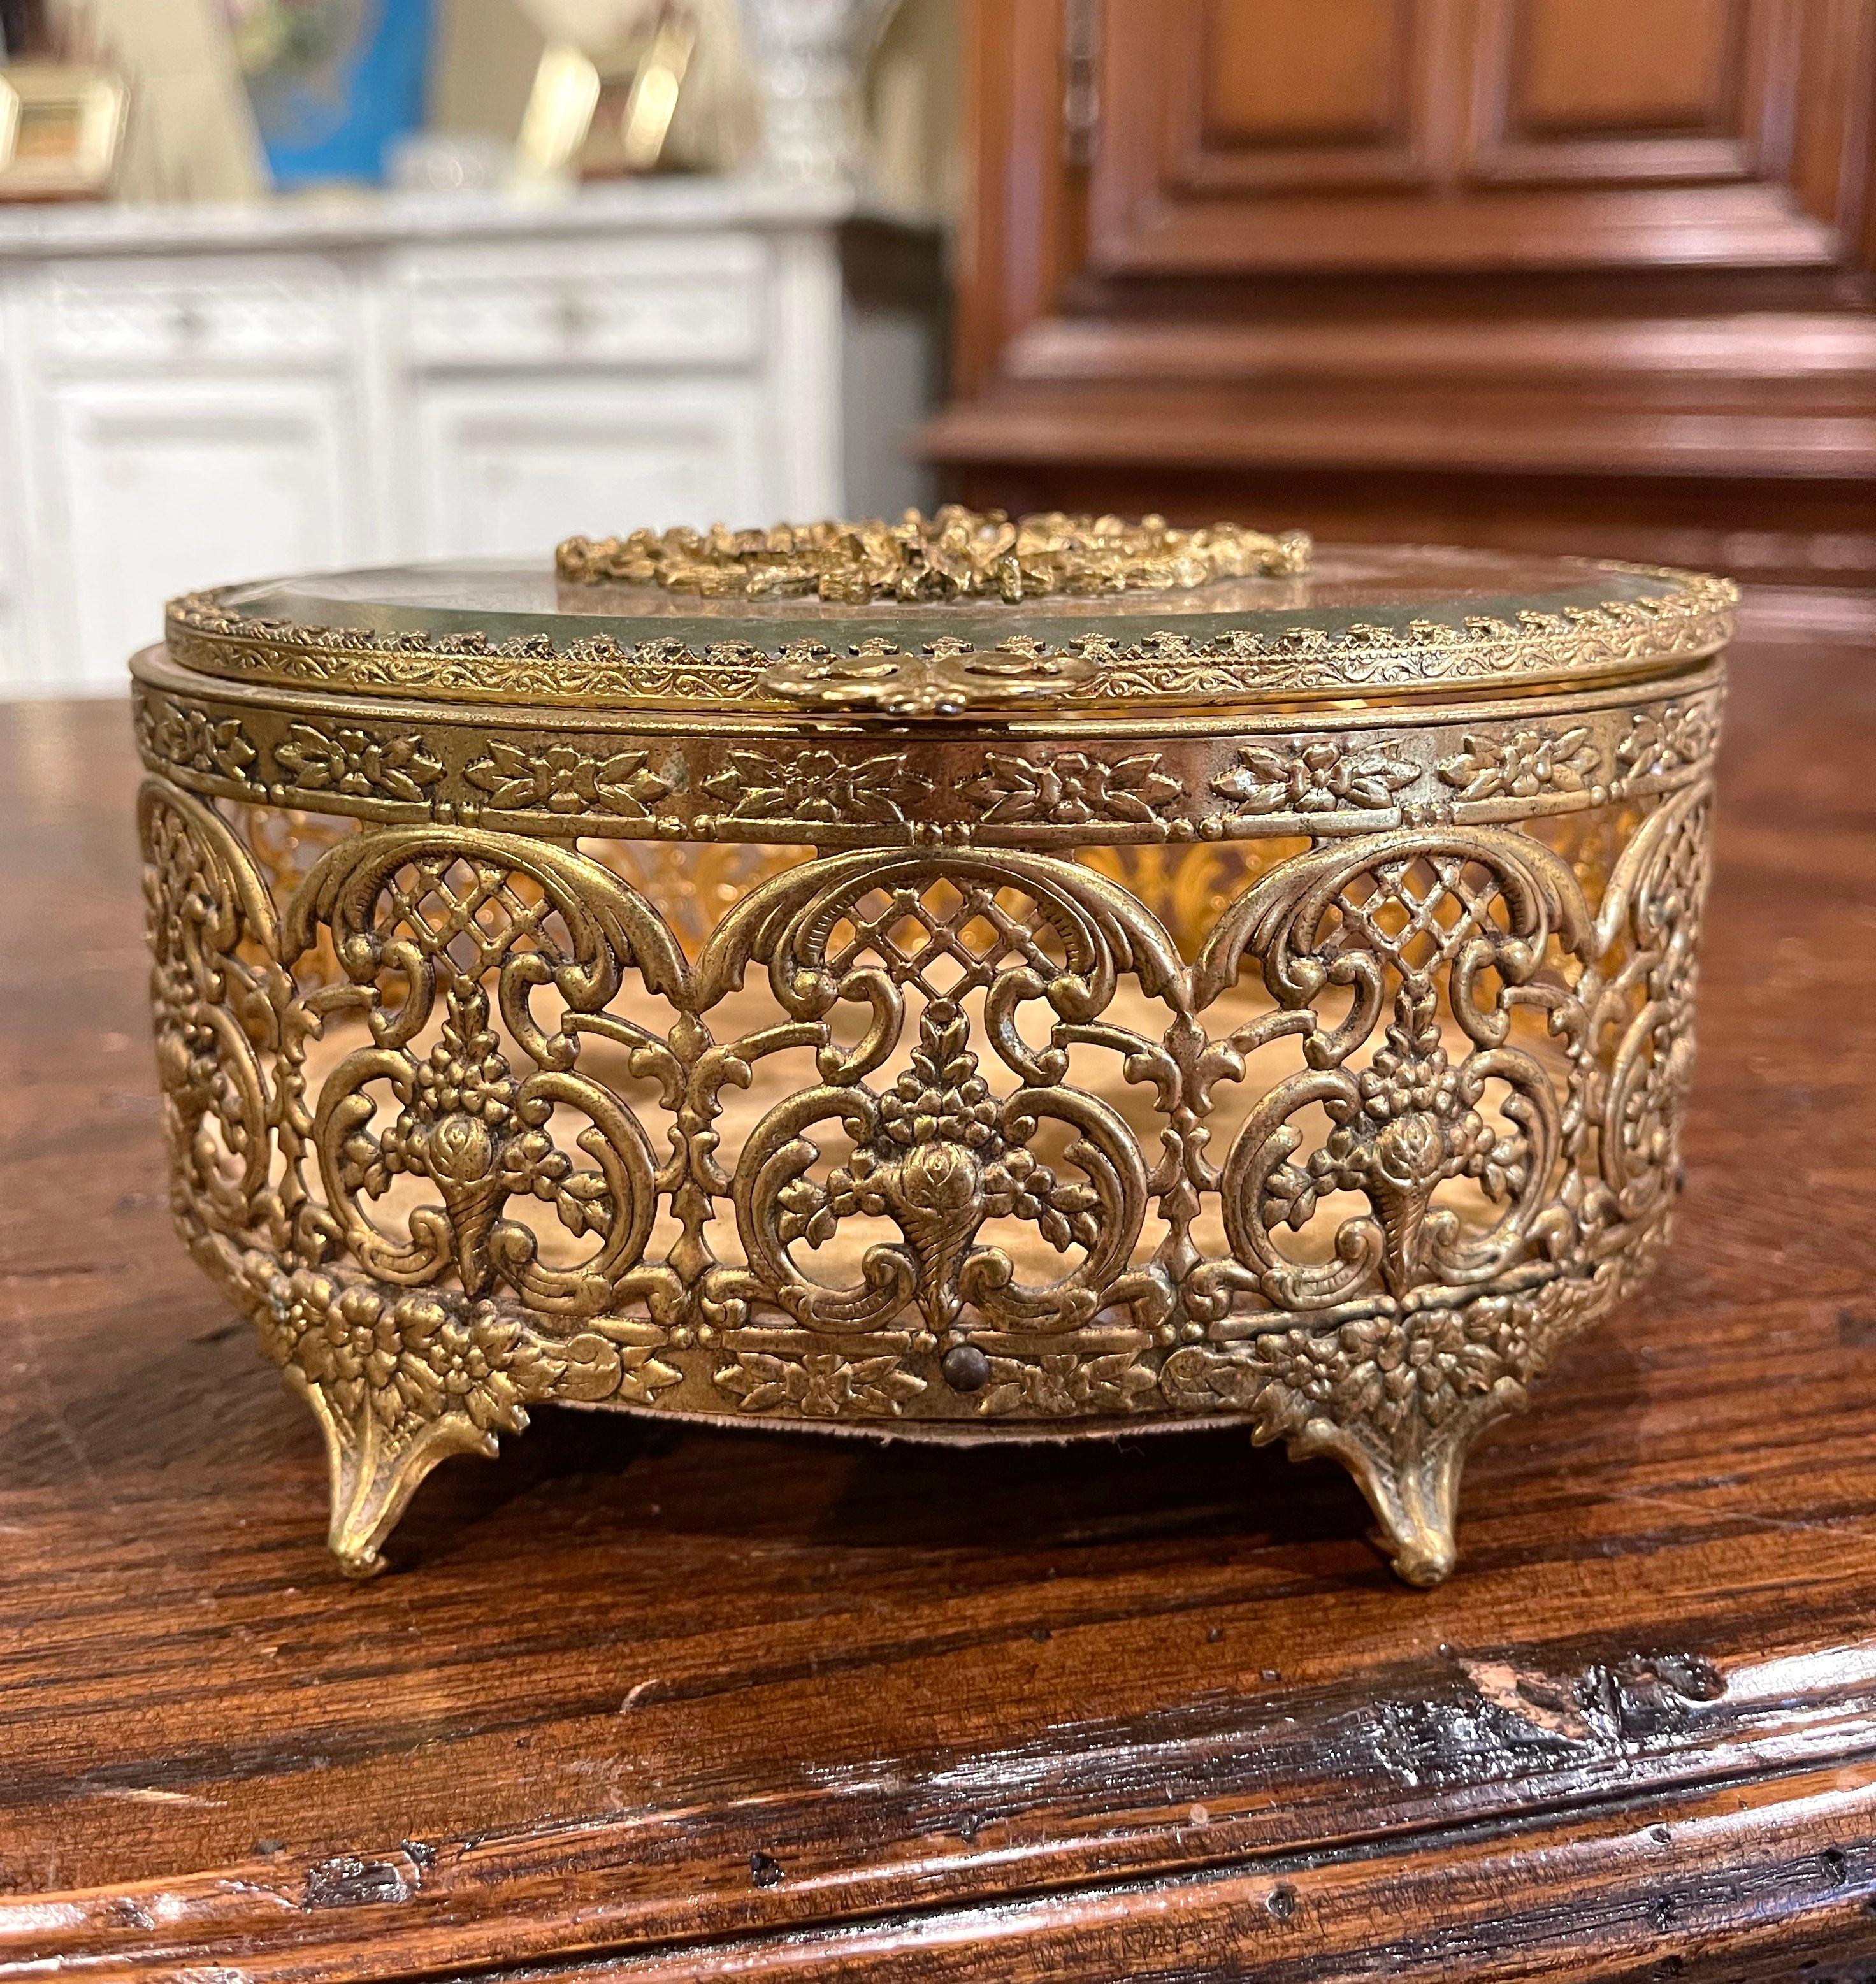 Keep your jewelry or other valuables in this delicate antique box. Crafted in France circa 1920, the box is oval in shape and stands on small curved feet; the pierced brass casket is decorated with floral motifs over a beveled glass top embellished